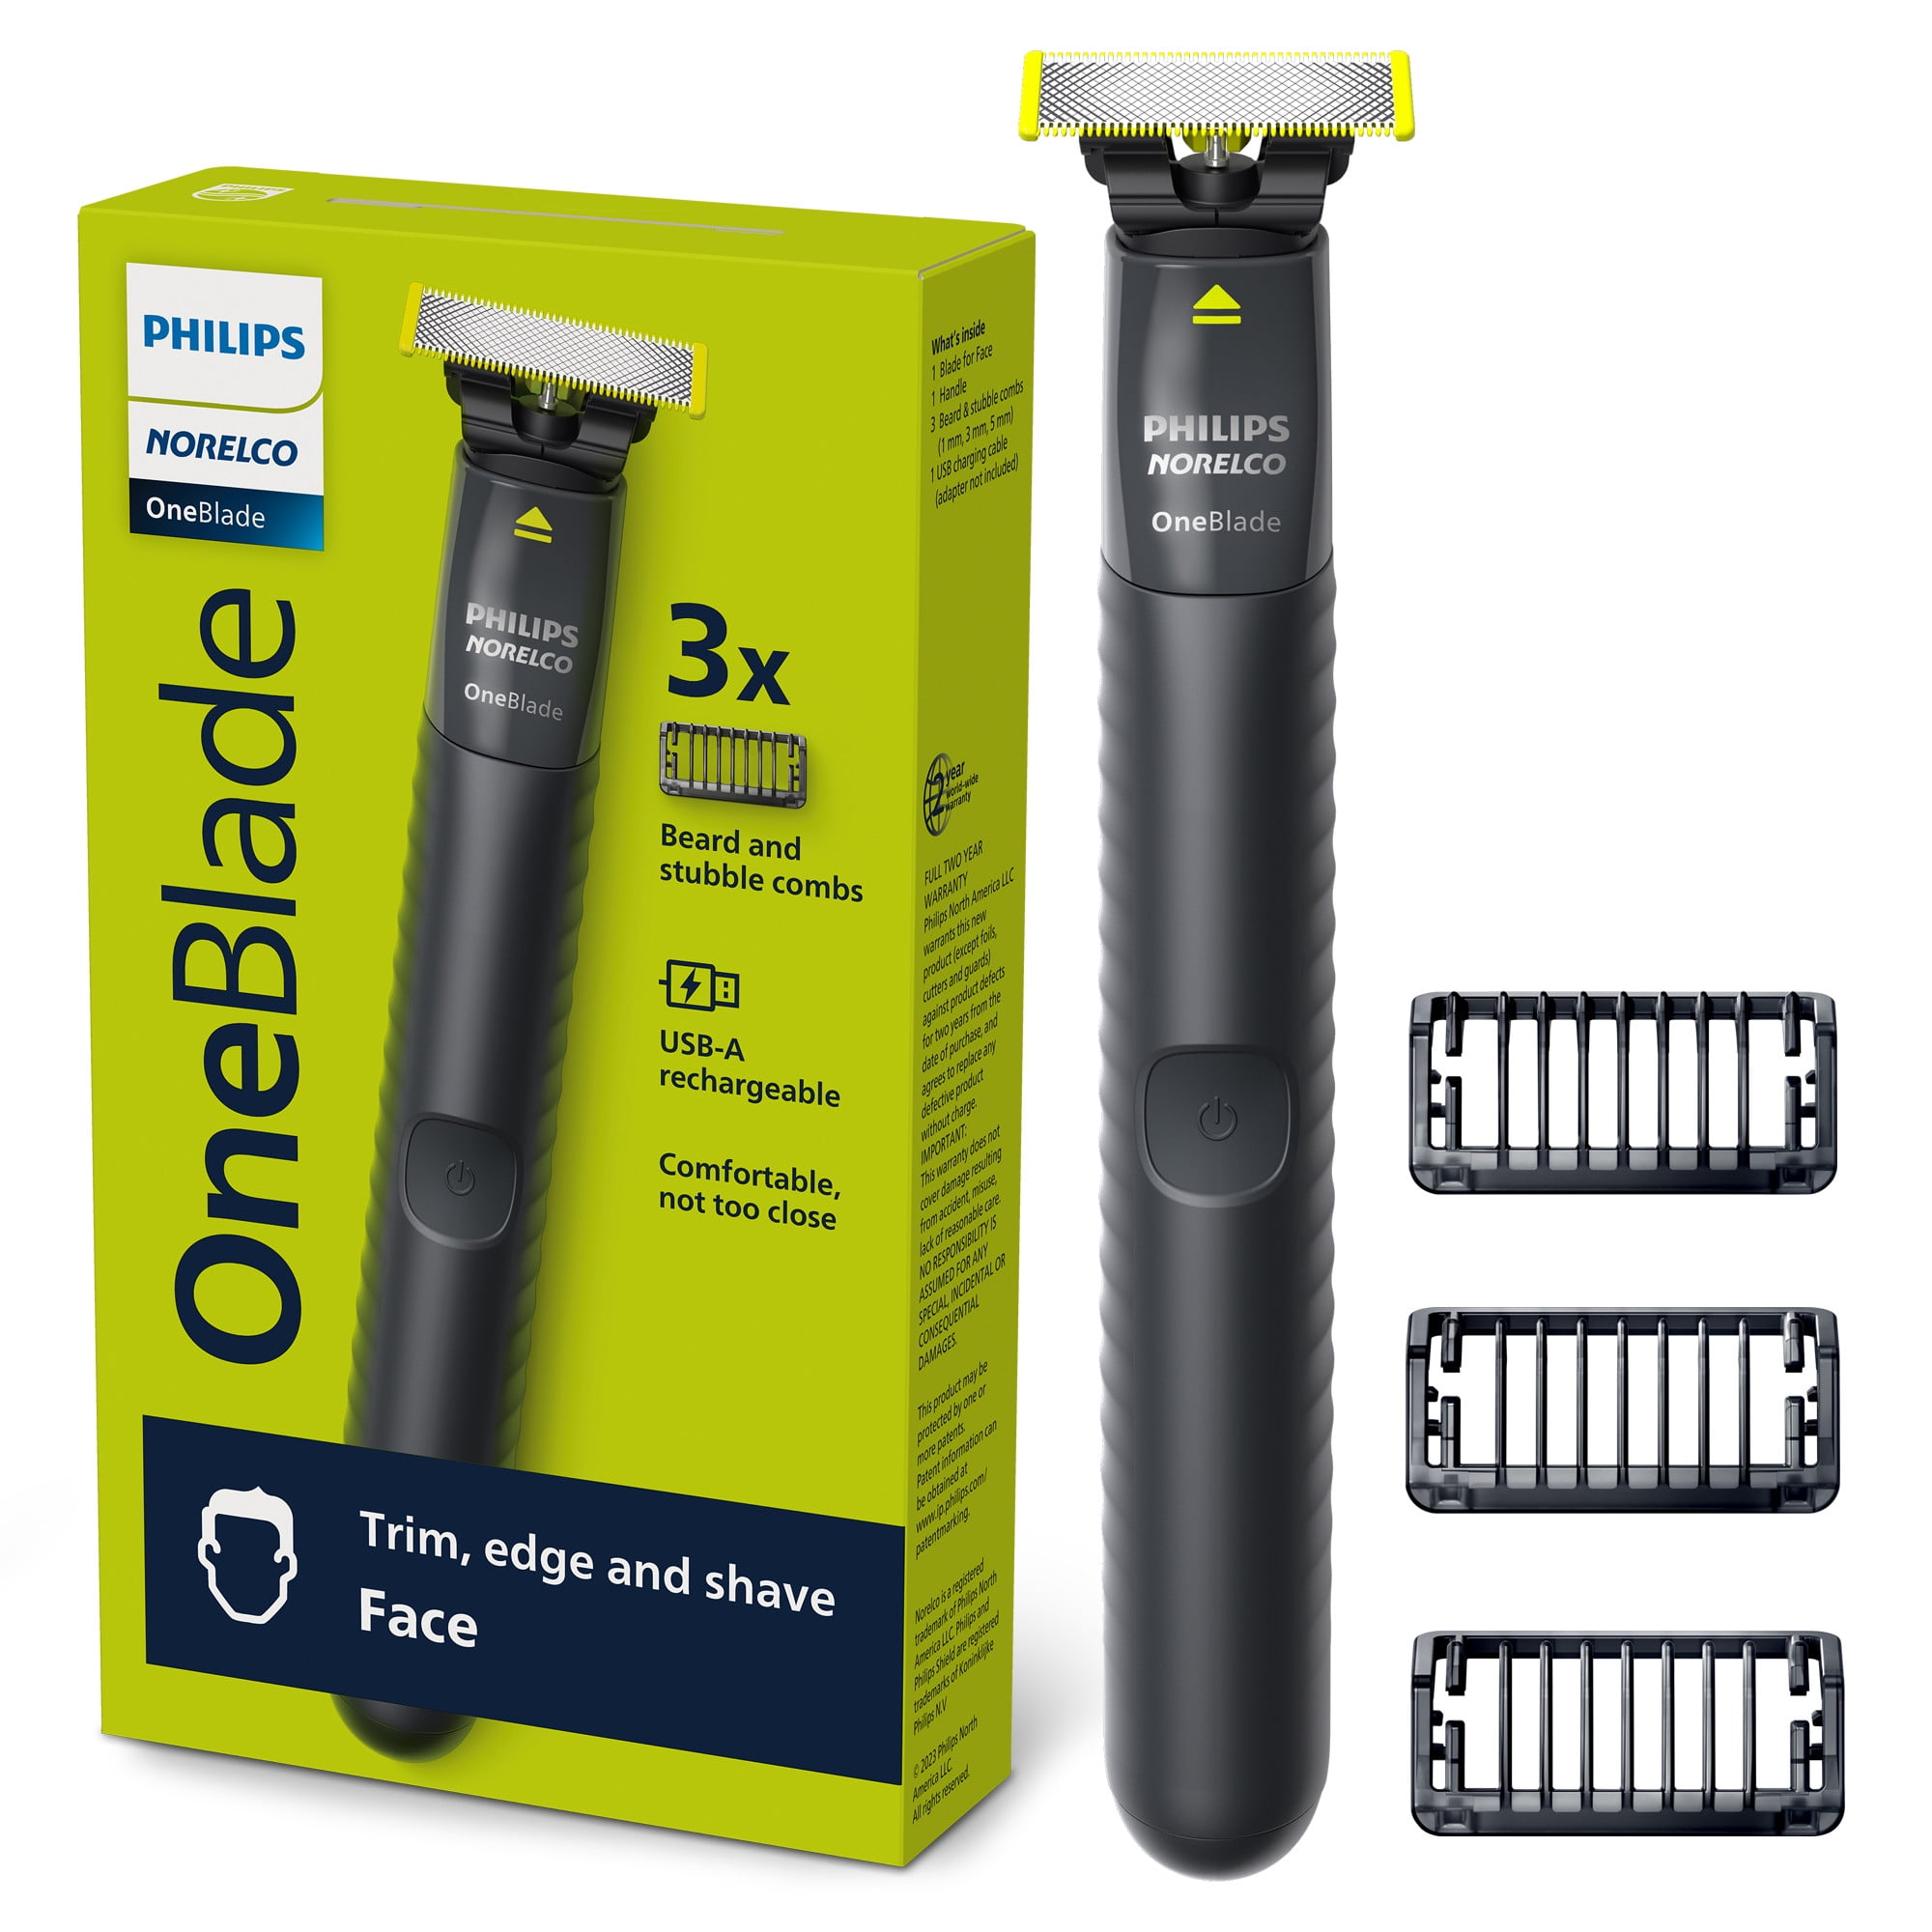 Philips Norelco Oneblade 360 Face Hybrid Electric Men's Trimmer